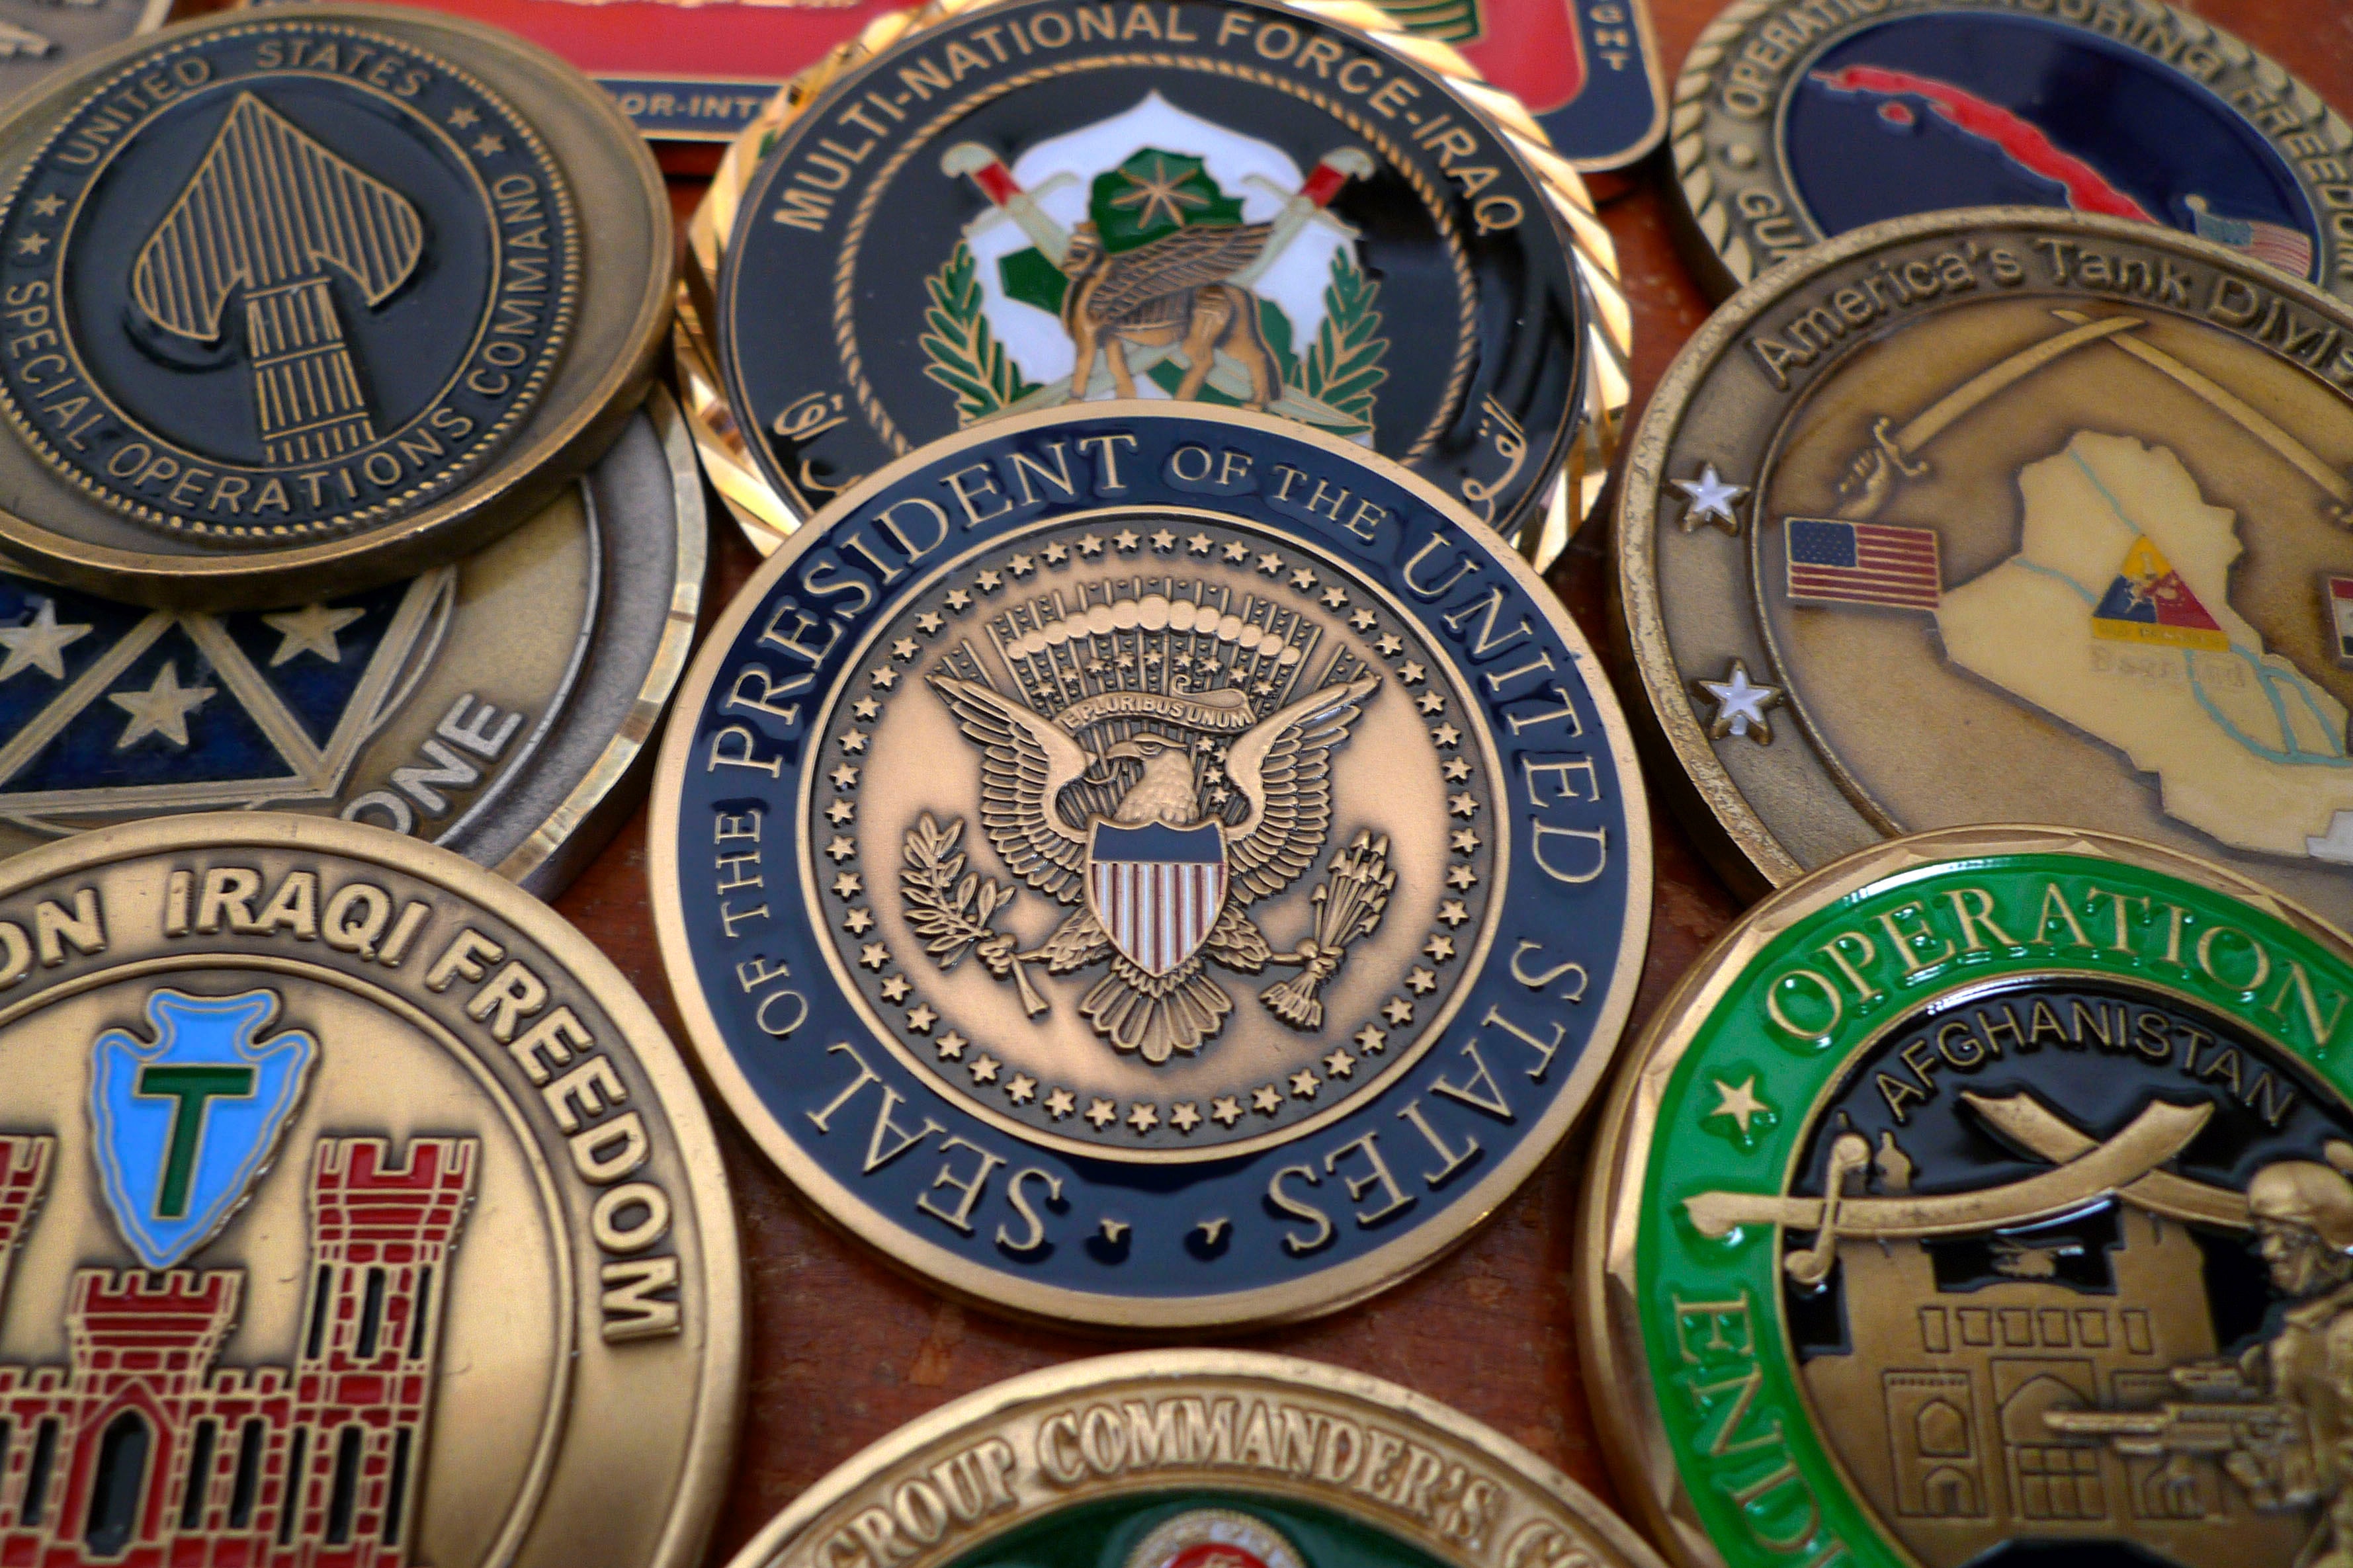 President Barack Obama coin is seen as part of the military challenge coin collection in Fairfax, Virginia September 5, 2010.  